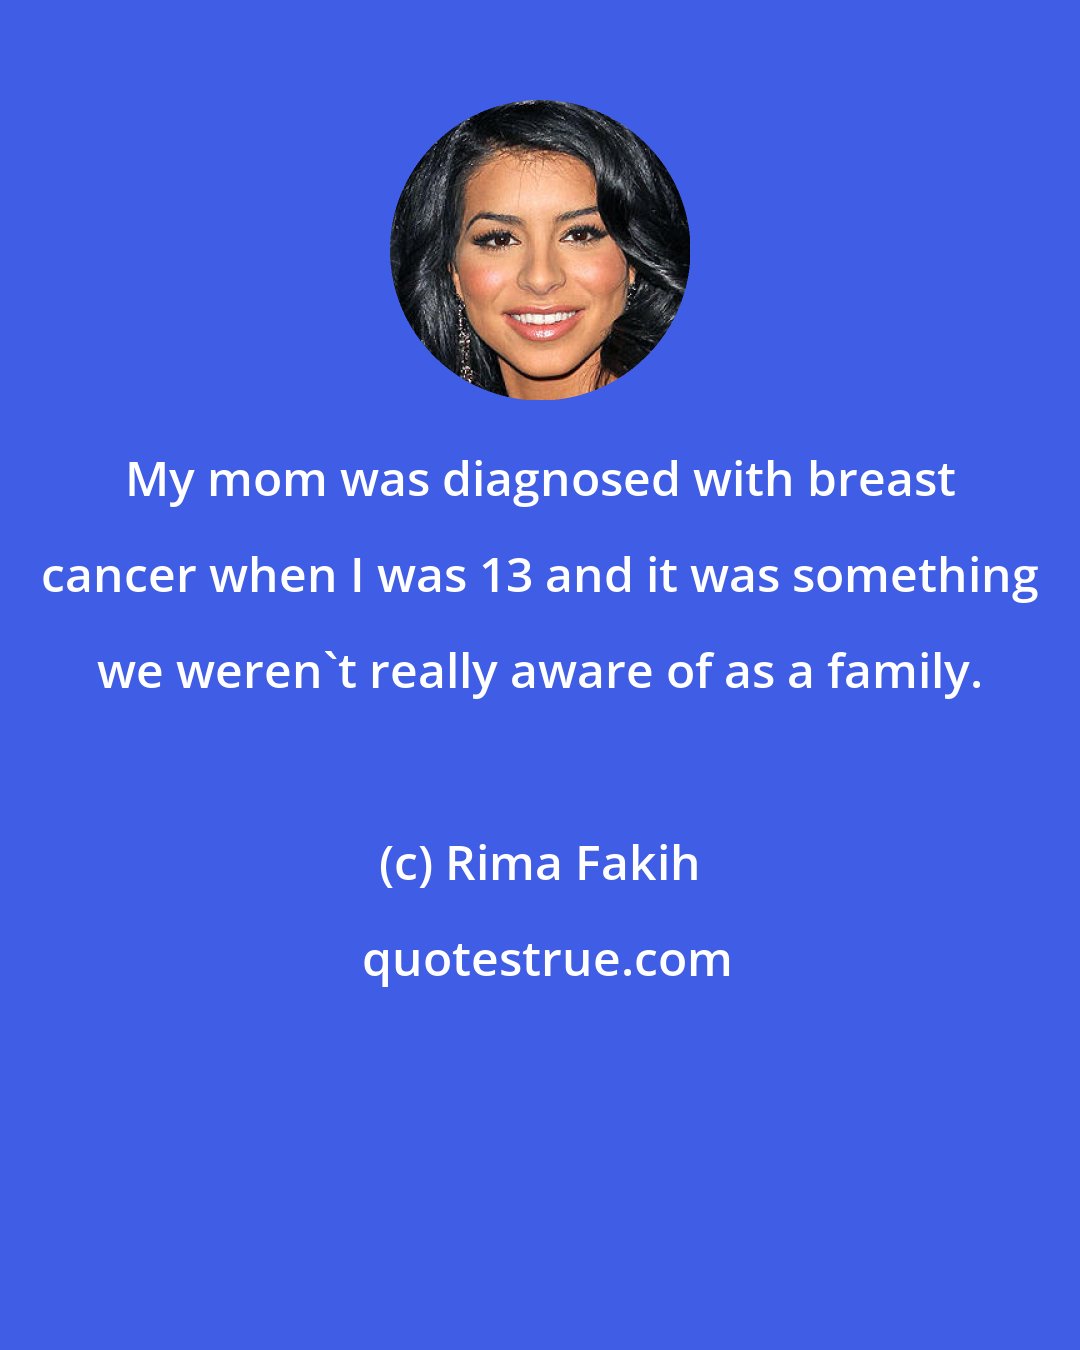 Rima Fakih: My mom was diagnosed with breast cancer when I was 13 and it was something we weren't really aware of as a family.